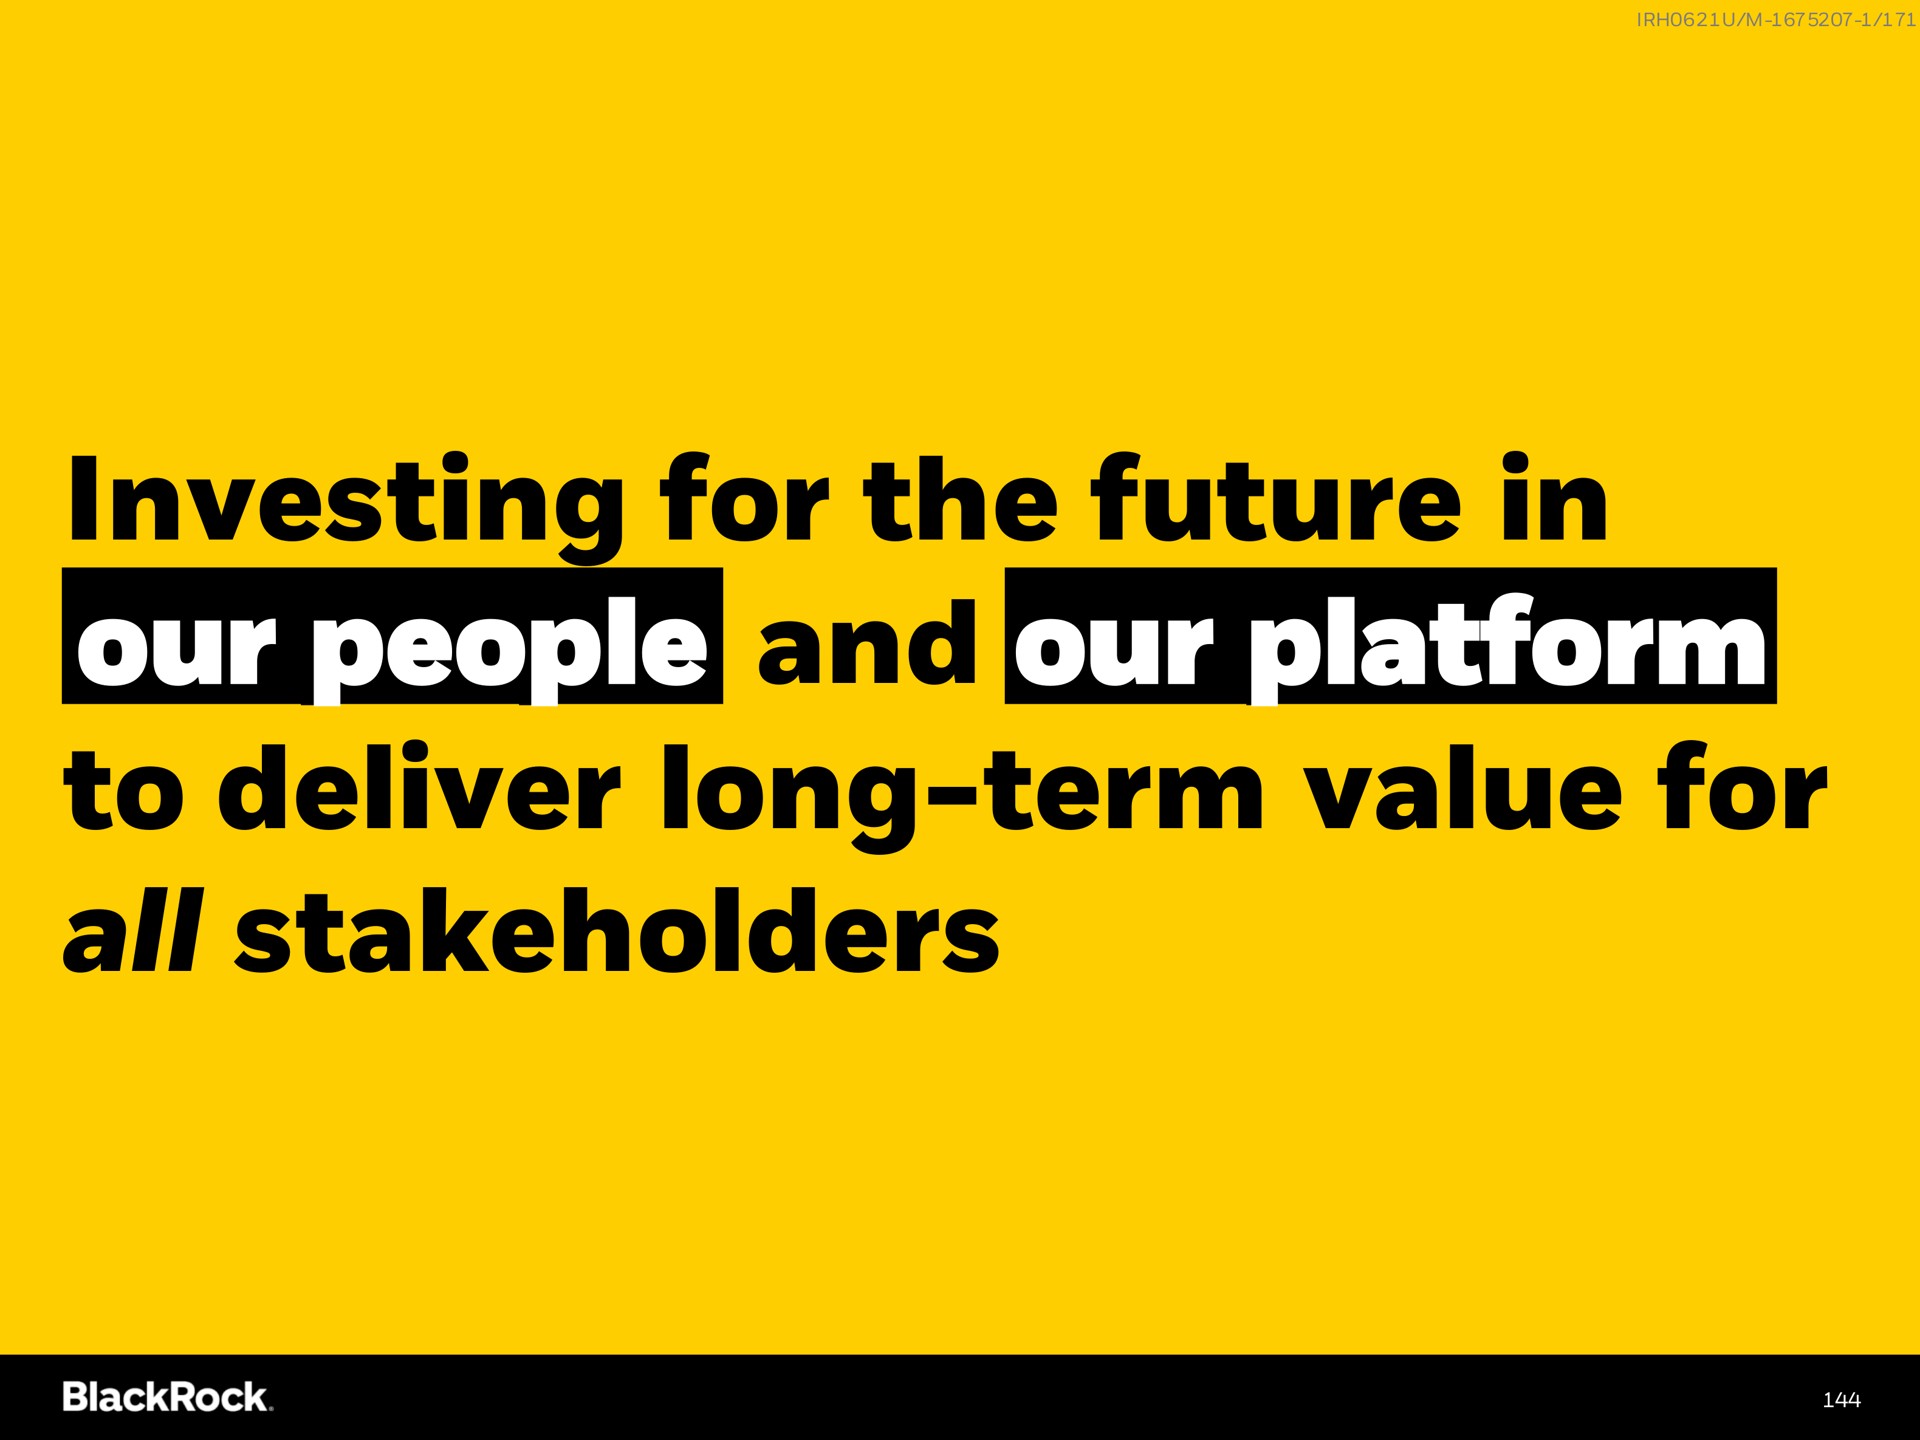 investing for the future in our platform our people our people and our platform to deliver long term value for all stakeholders | BlackRock